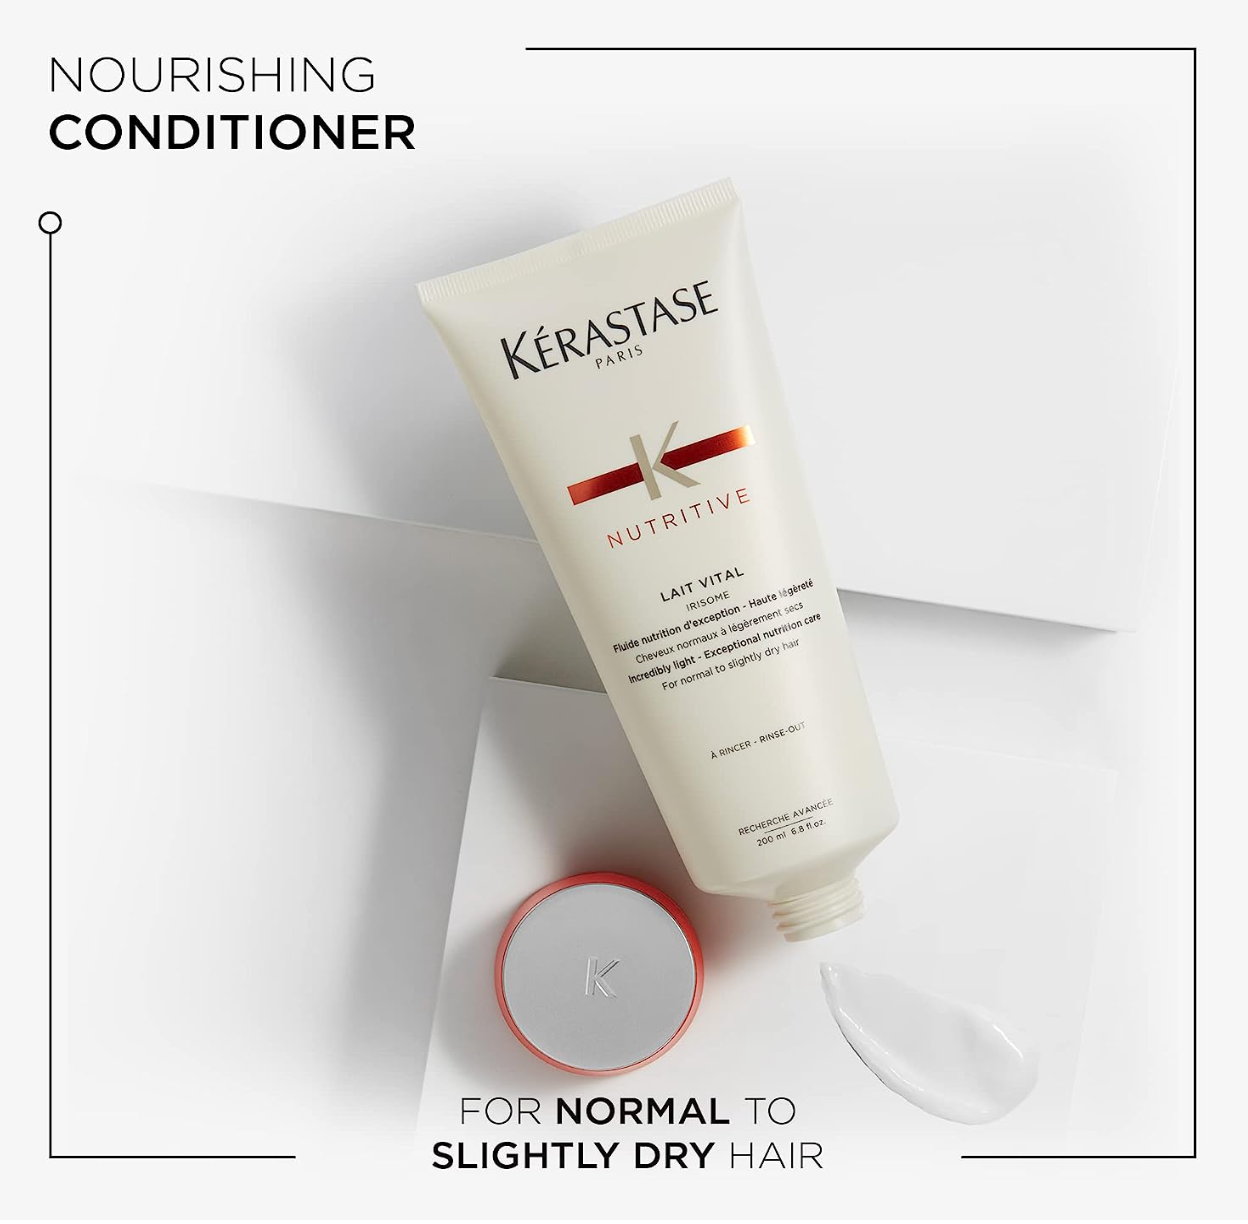 Kerastase Nutritive Lait Vital Conditioner | Nourishing and Lightweight Formula for Hydration and Healthy Hair | Illuminates Shiny Hair and Easily Detangles | For Normal or Dry Hair